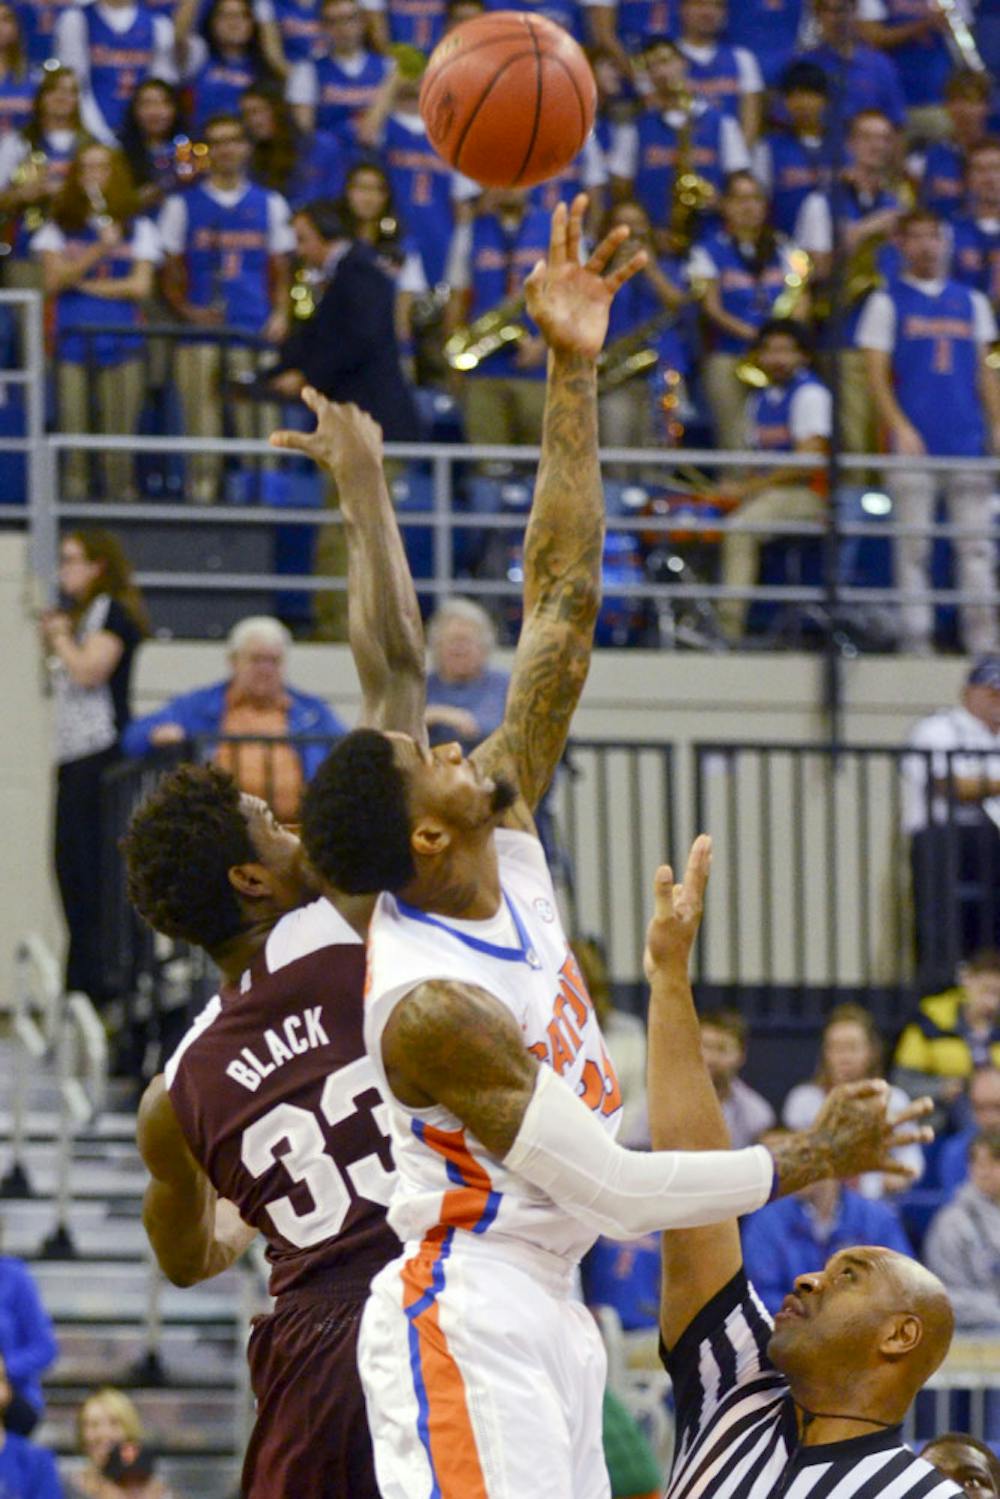 <p>Chris Walker jumps for the opening tipoff during Florida's 72-47 win against Mississippi State on Jan. 10, 2015, in the O'Connell Center.</p>